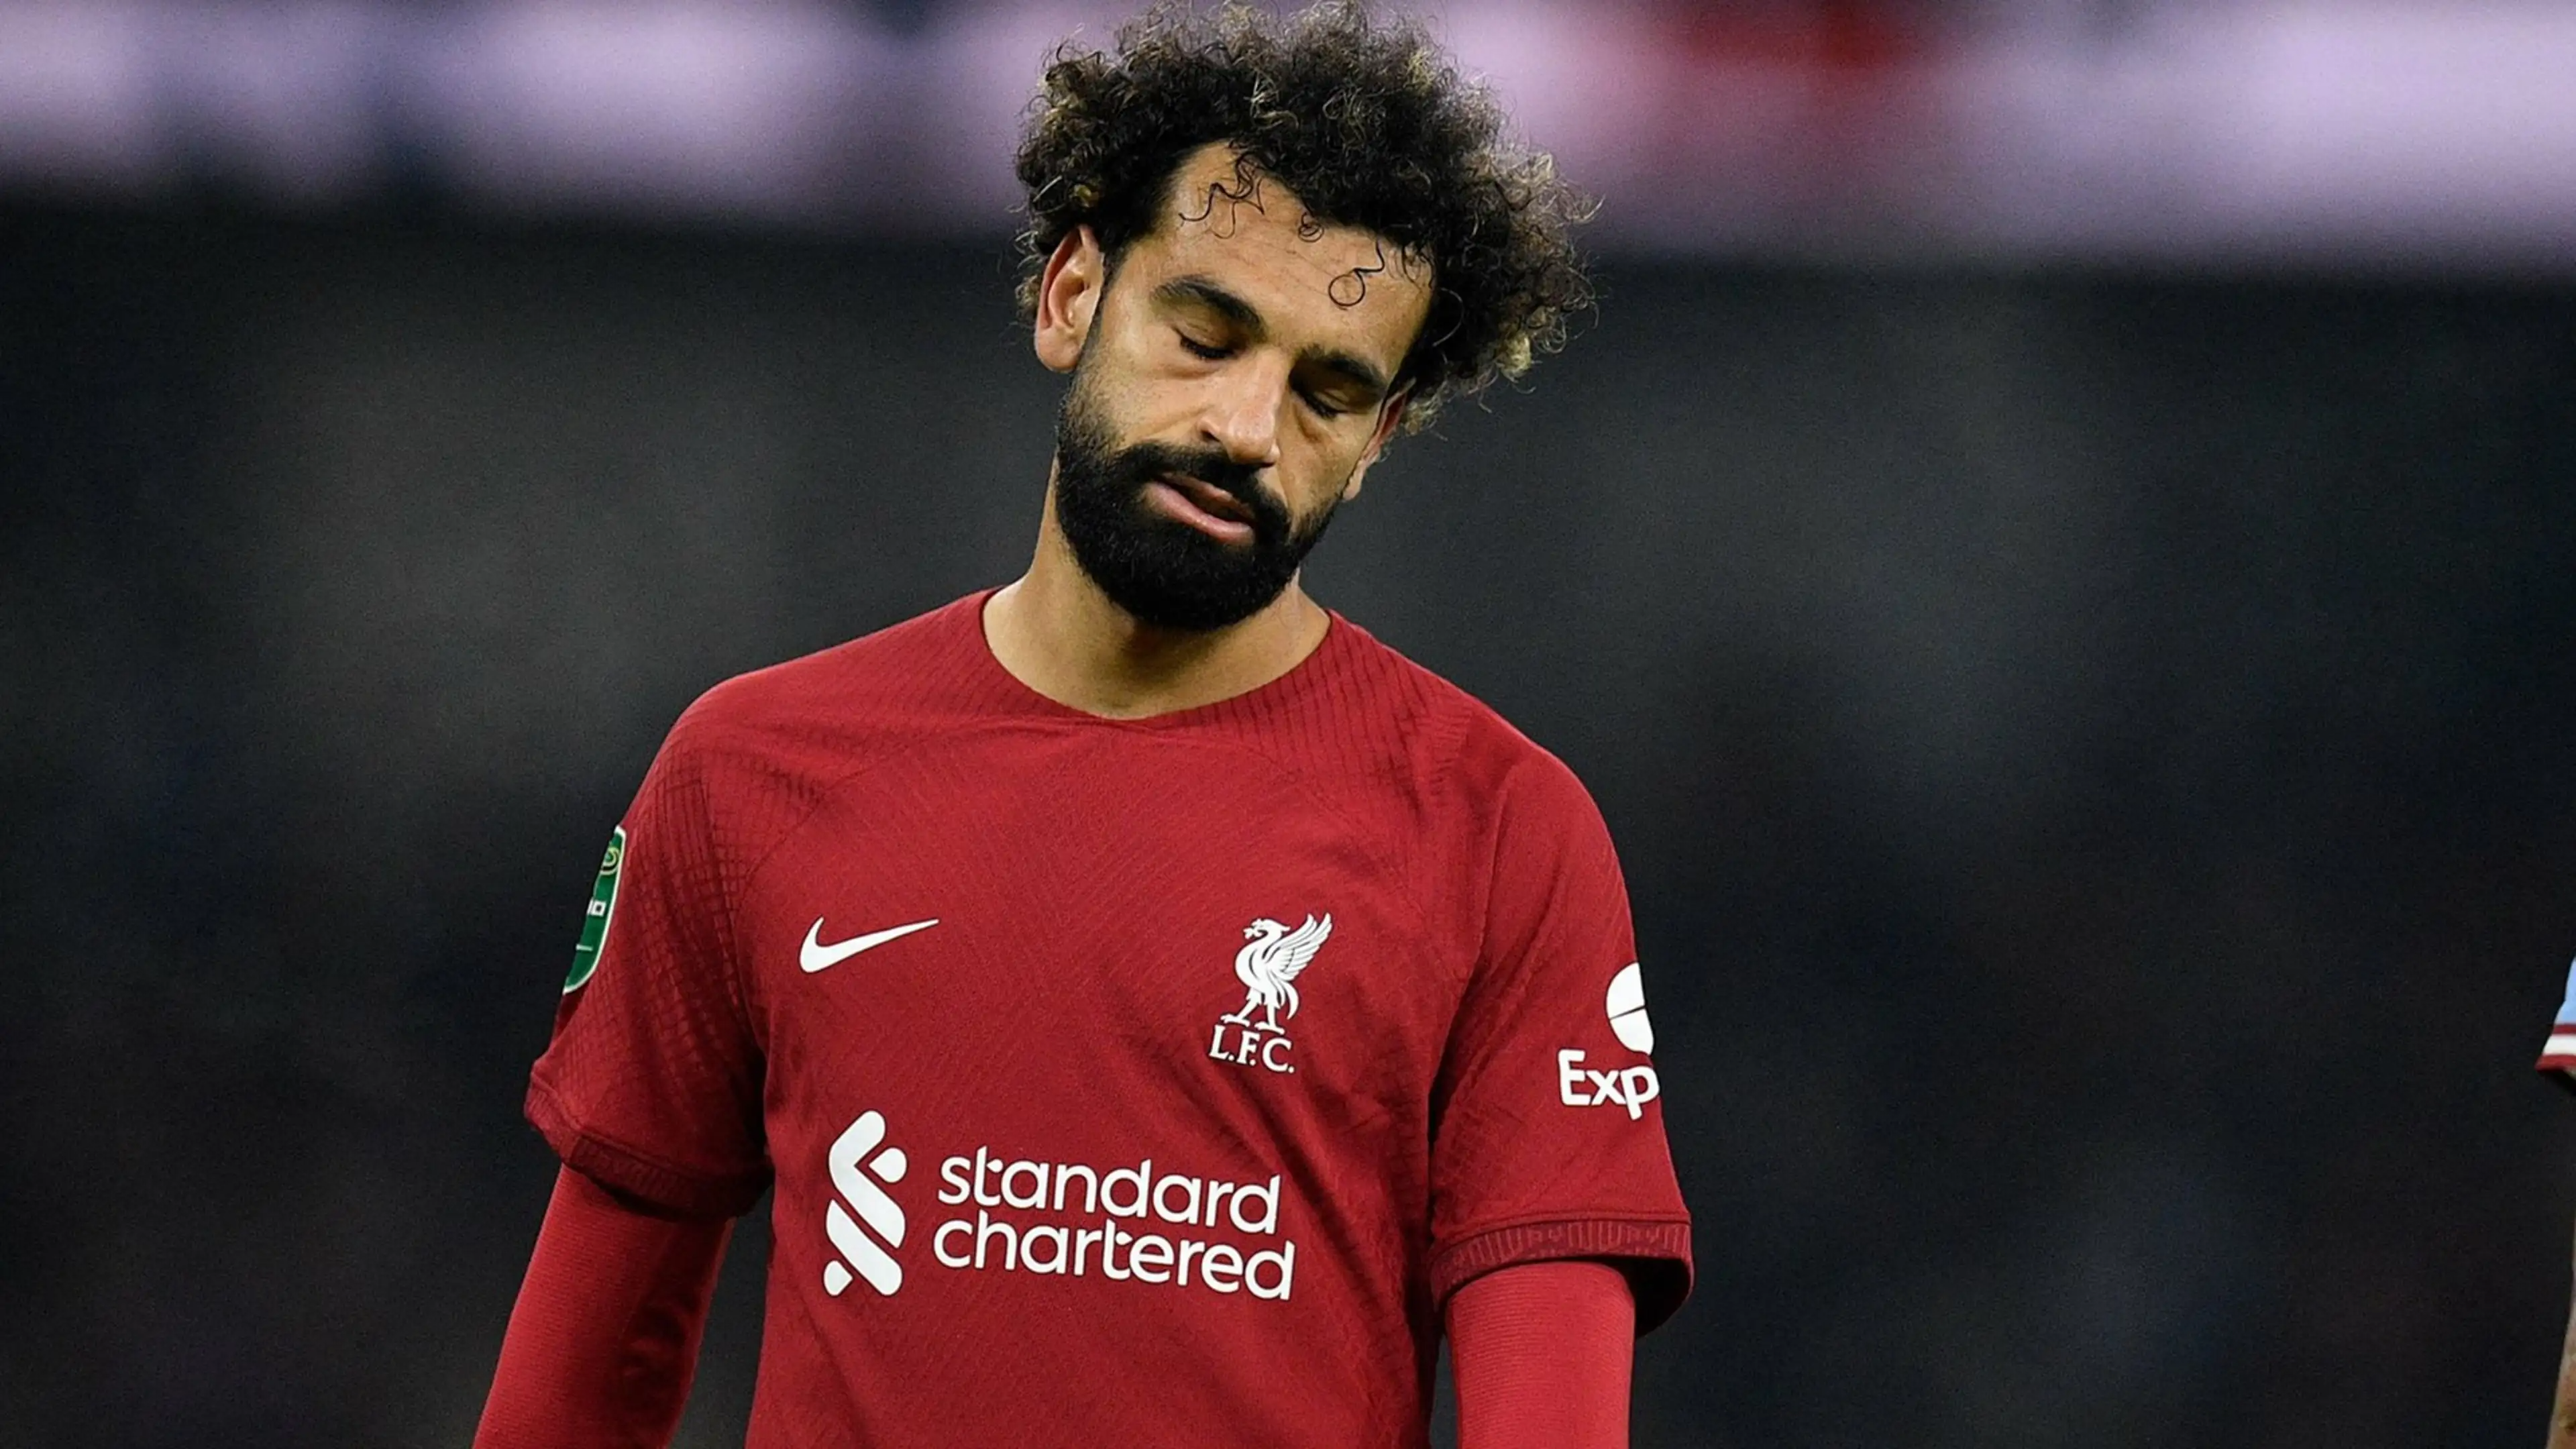 Salah Informs Liverpool Management That He Wants To Move To Al-Ittihad